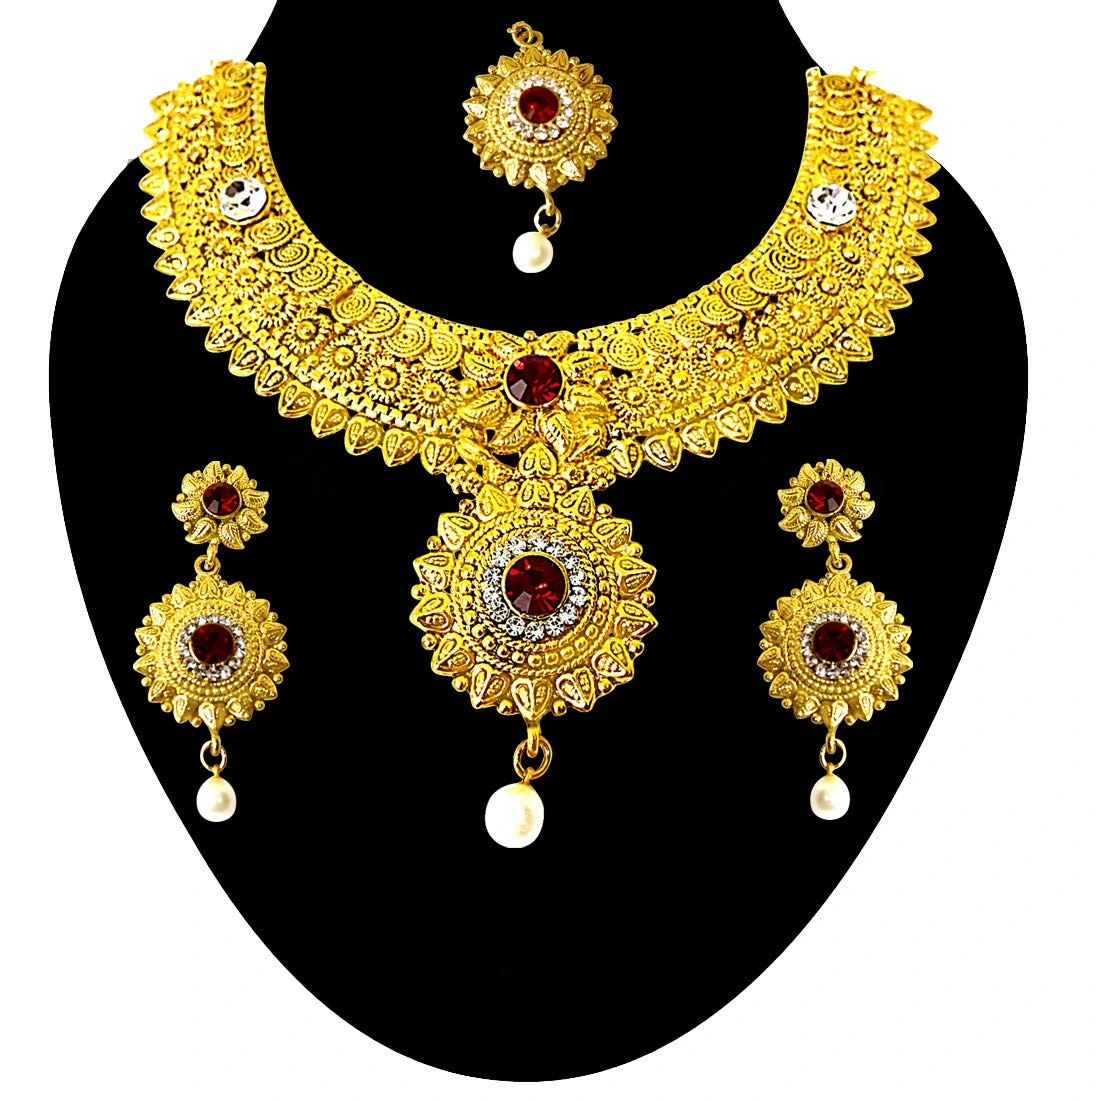 Ethnic Choker Style Gold Plated Designer Red Coloured Stone Fashion Jewellery Set PS335